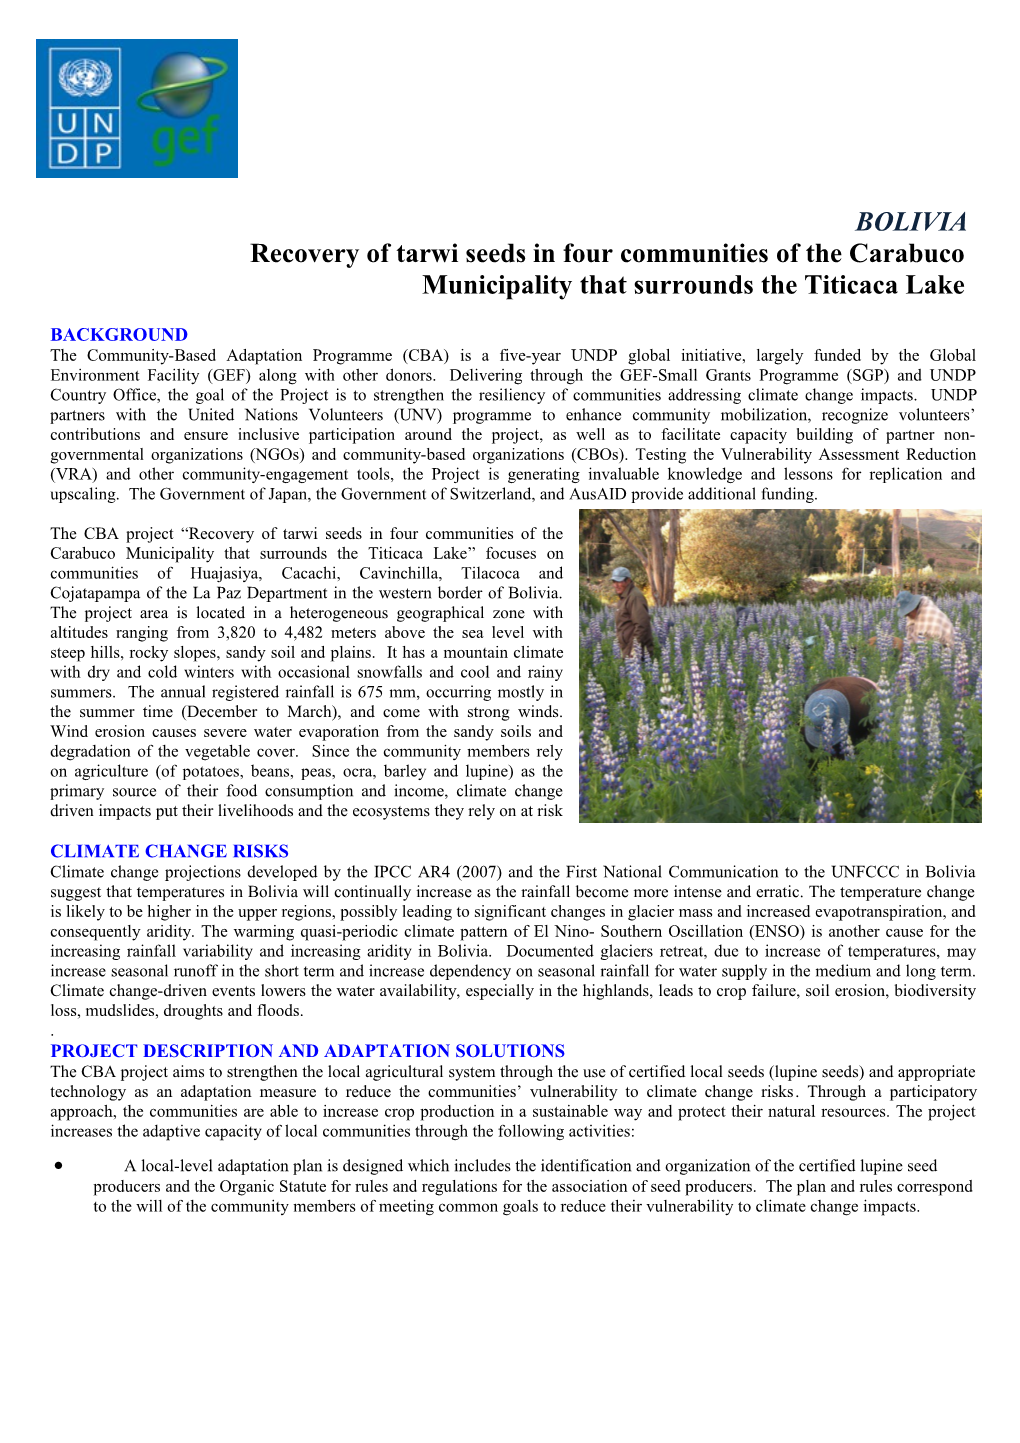 Recovery of Tarwi Seeds in Four Communities of the Carabuco Municipality That Surrounds